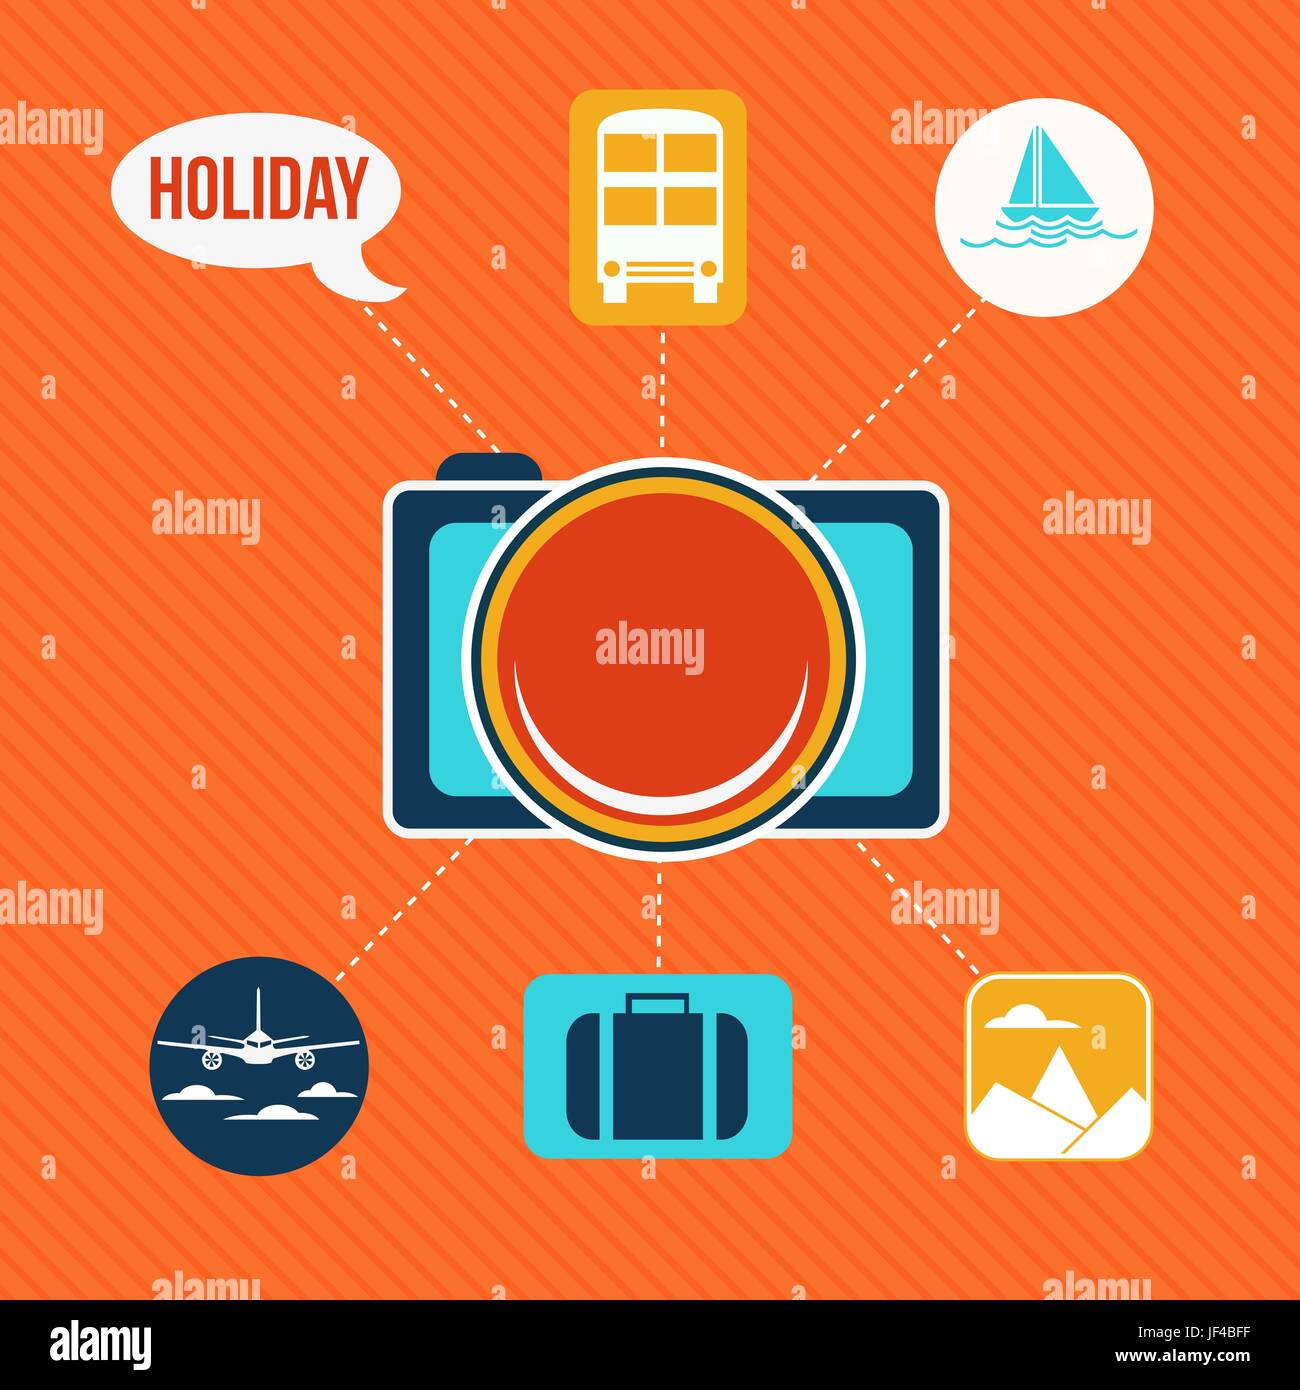 abstract, london, abstract, airplane beach blue boat business concept Stock Vector